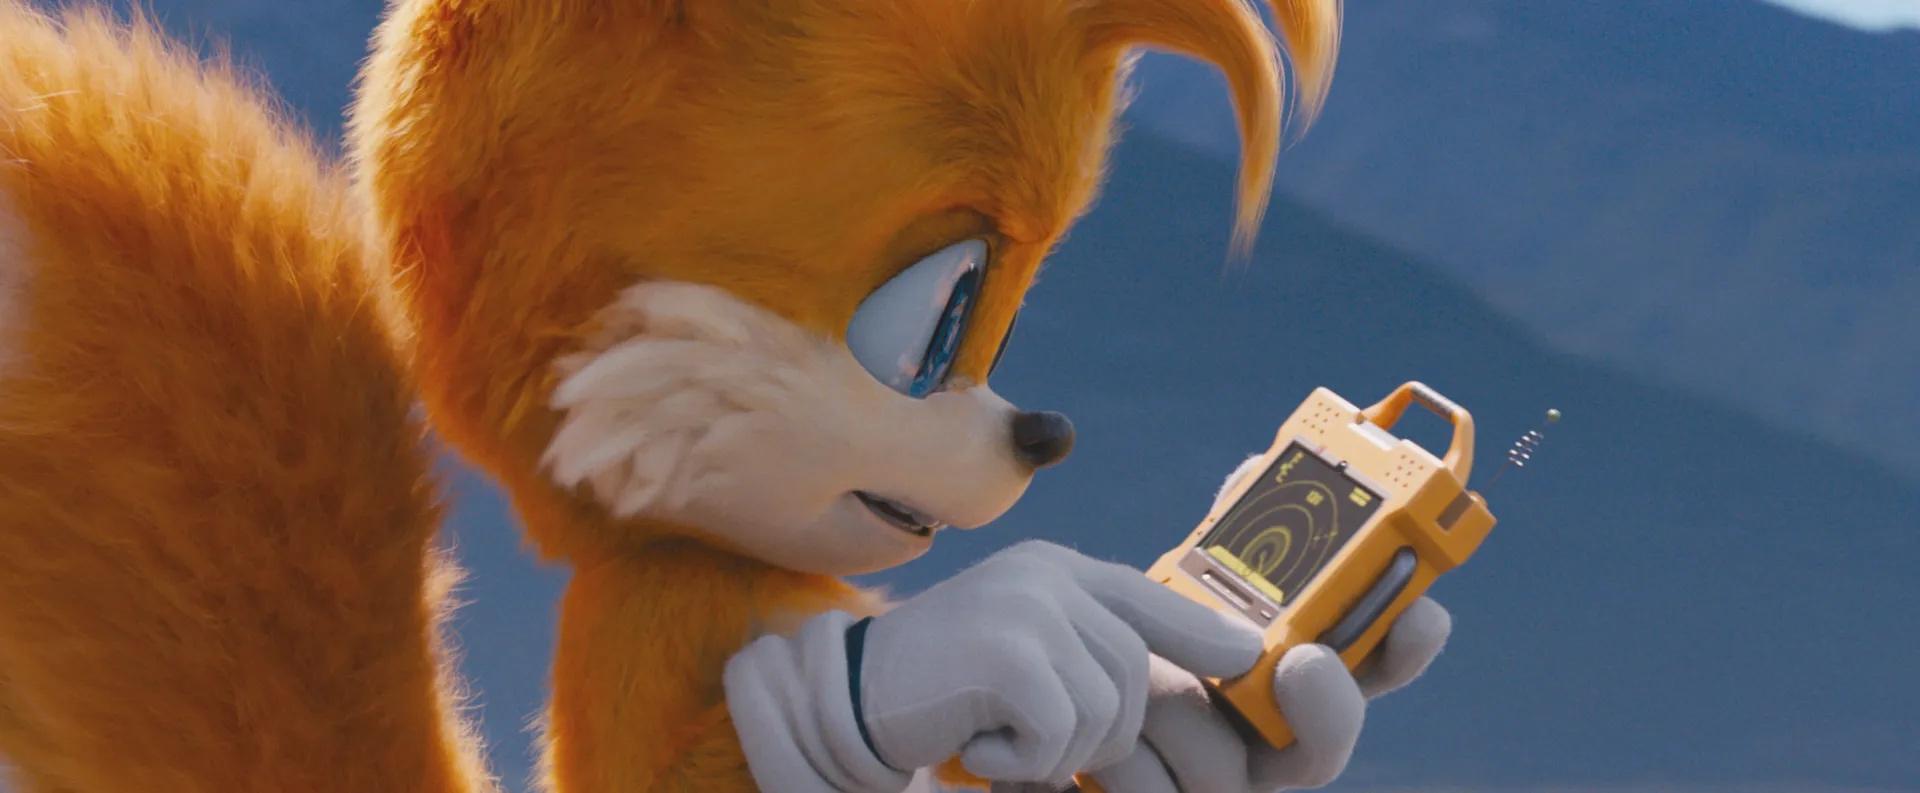 Sonic The Hedgehog - Spoiler: Tails dies at the end.